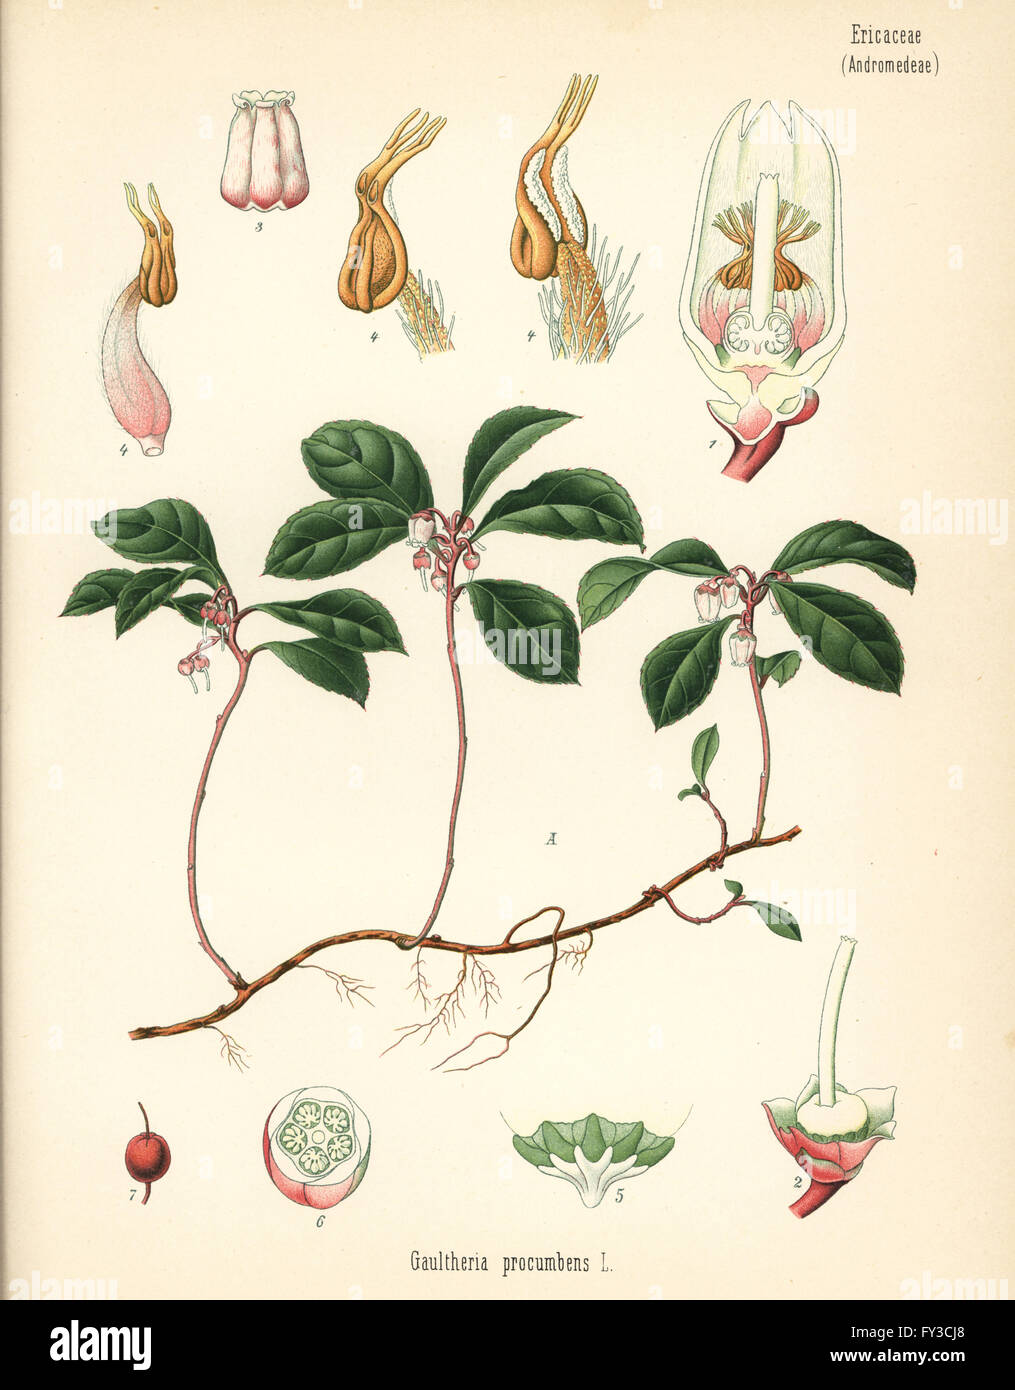 American wintergreen, Gaultheria procumbens. Chromolithograph after a botanical illustration from Hermann Adolph Koehler's Medicinal Plants, edited by Gustav Pabst, Koehler, Germany, 1887. Stock Photo